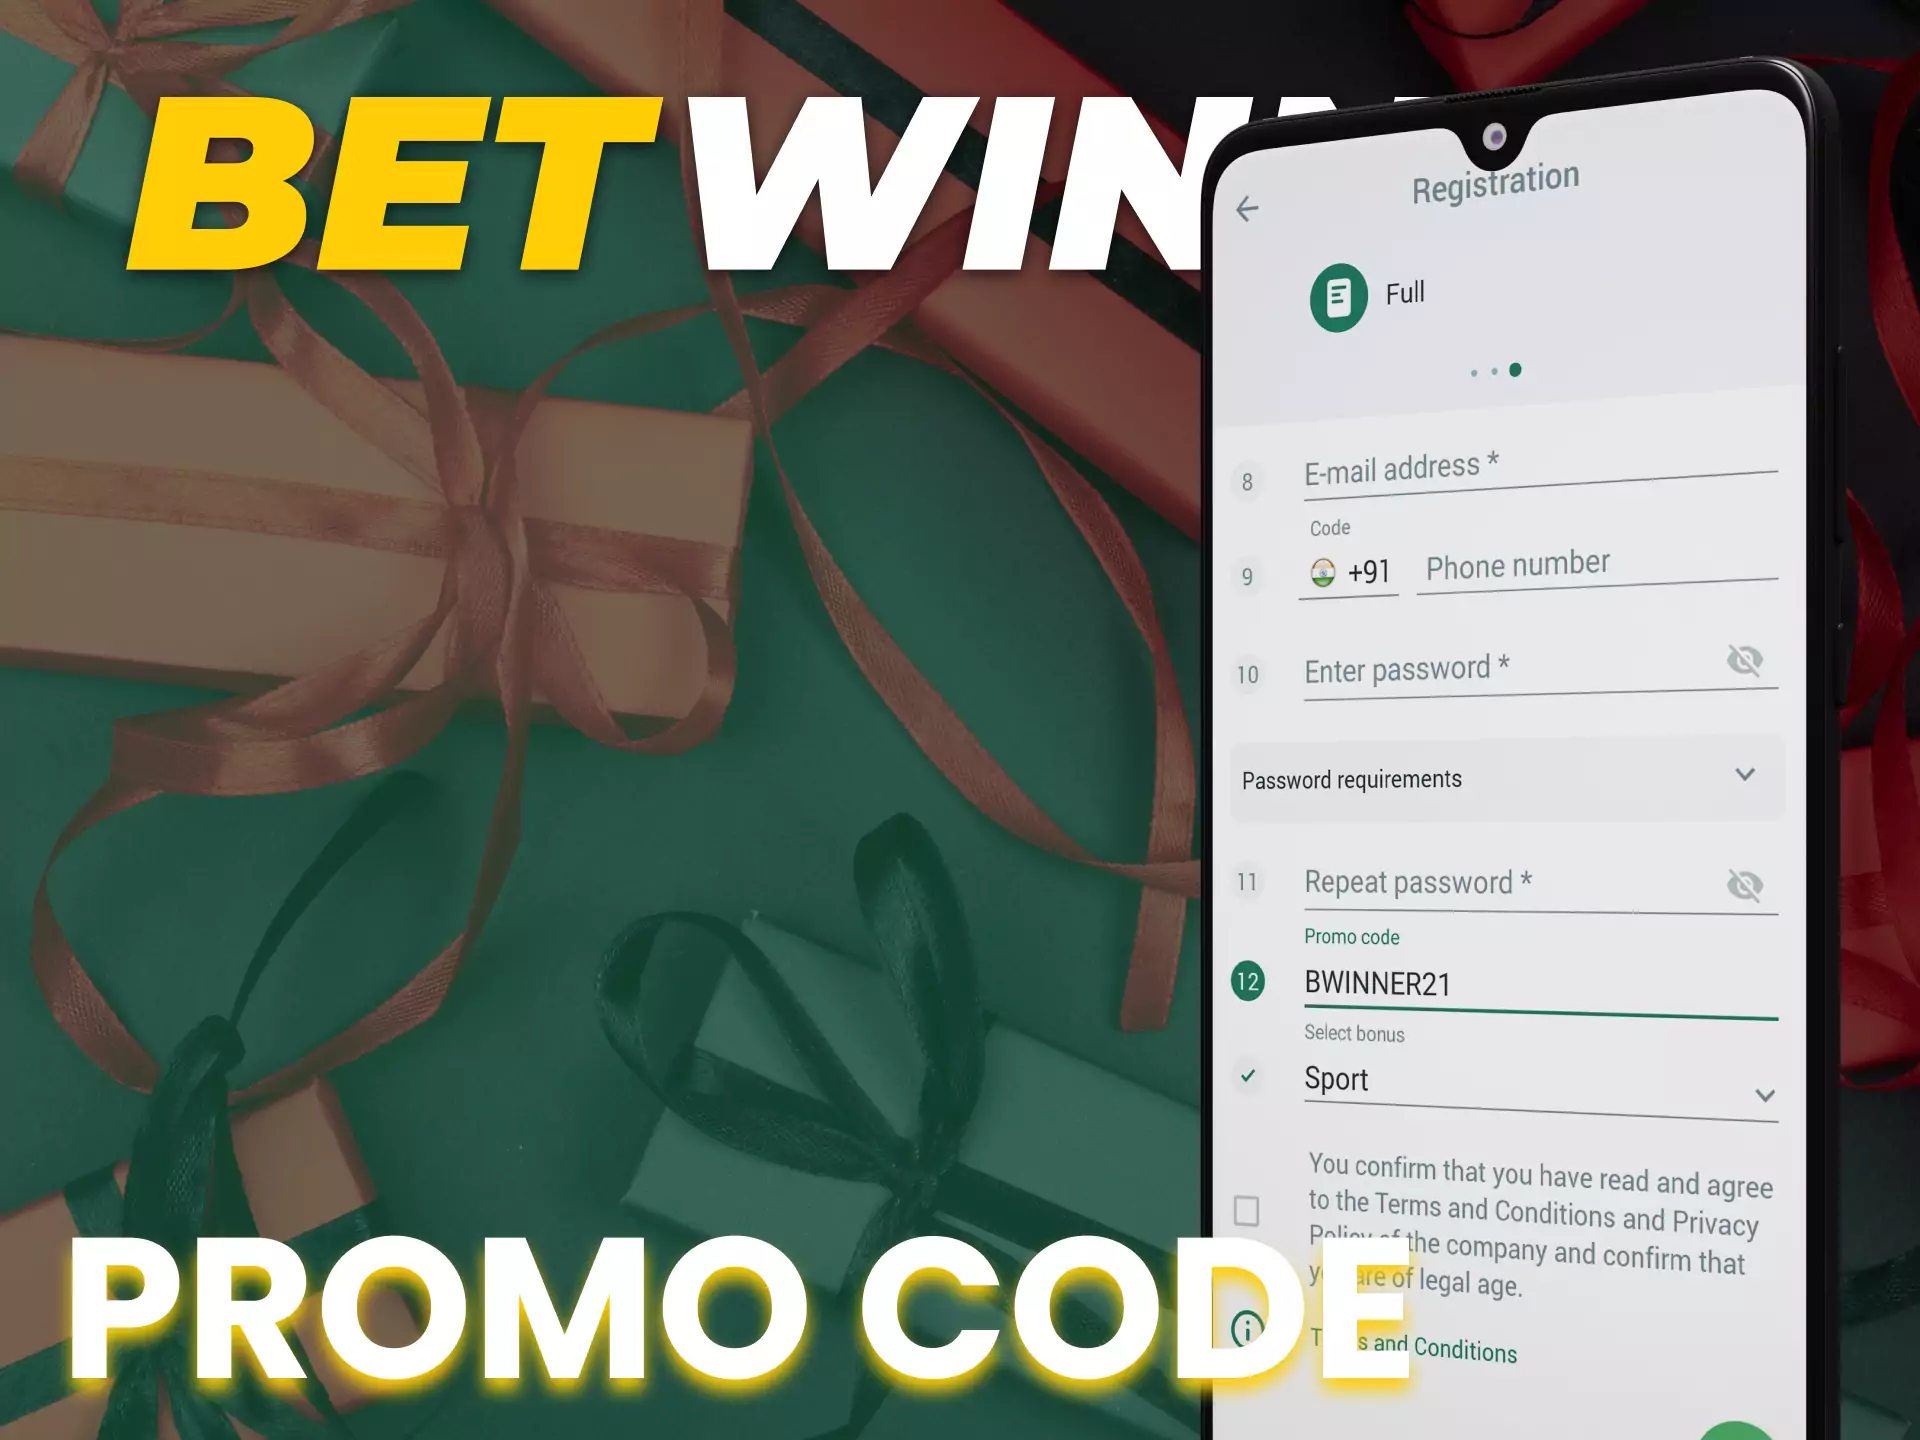 The Complete Guide To Understanding Betwinner dépôt